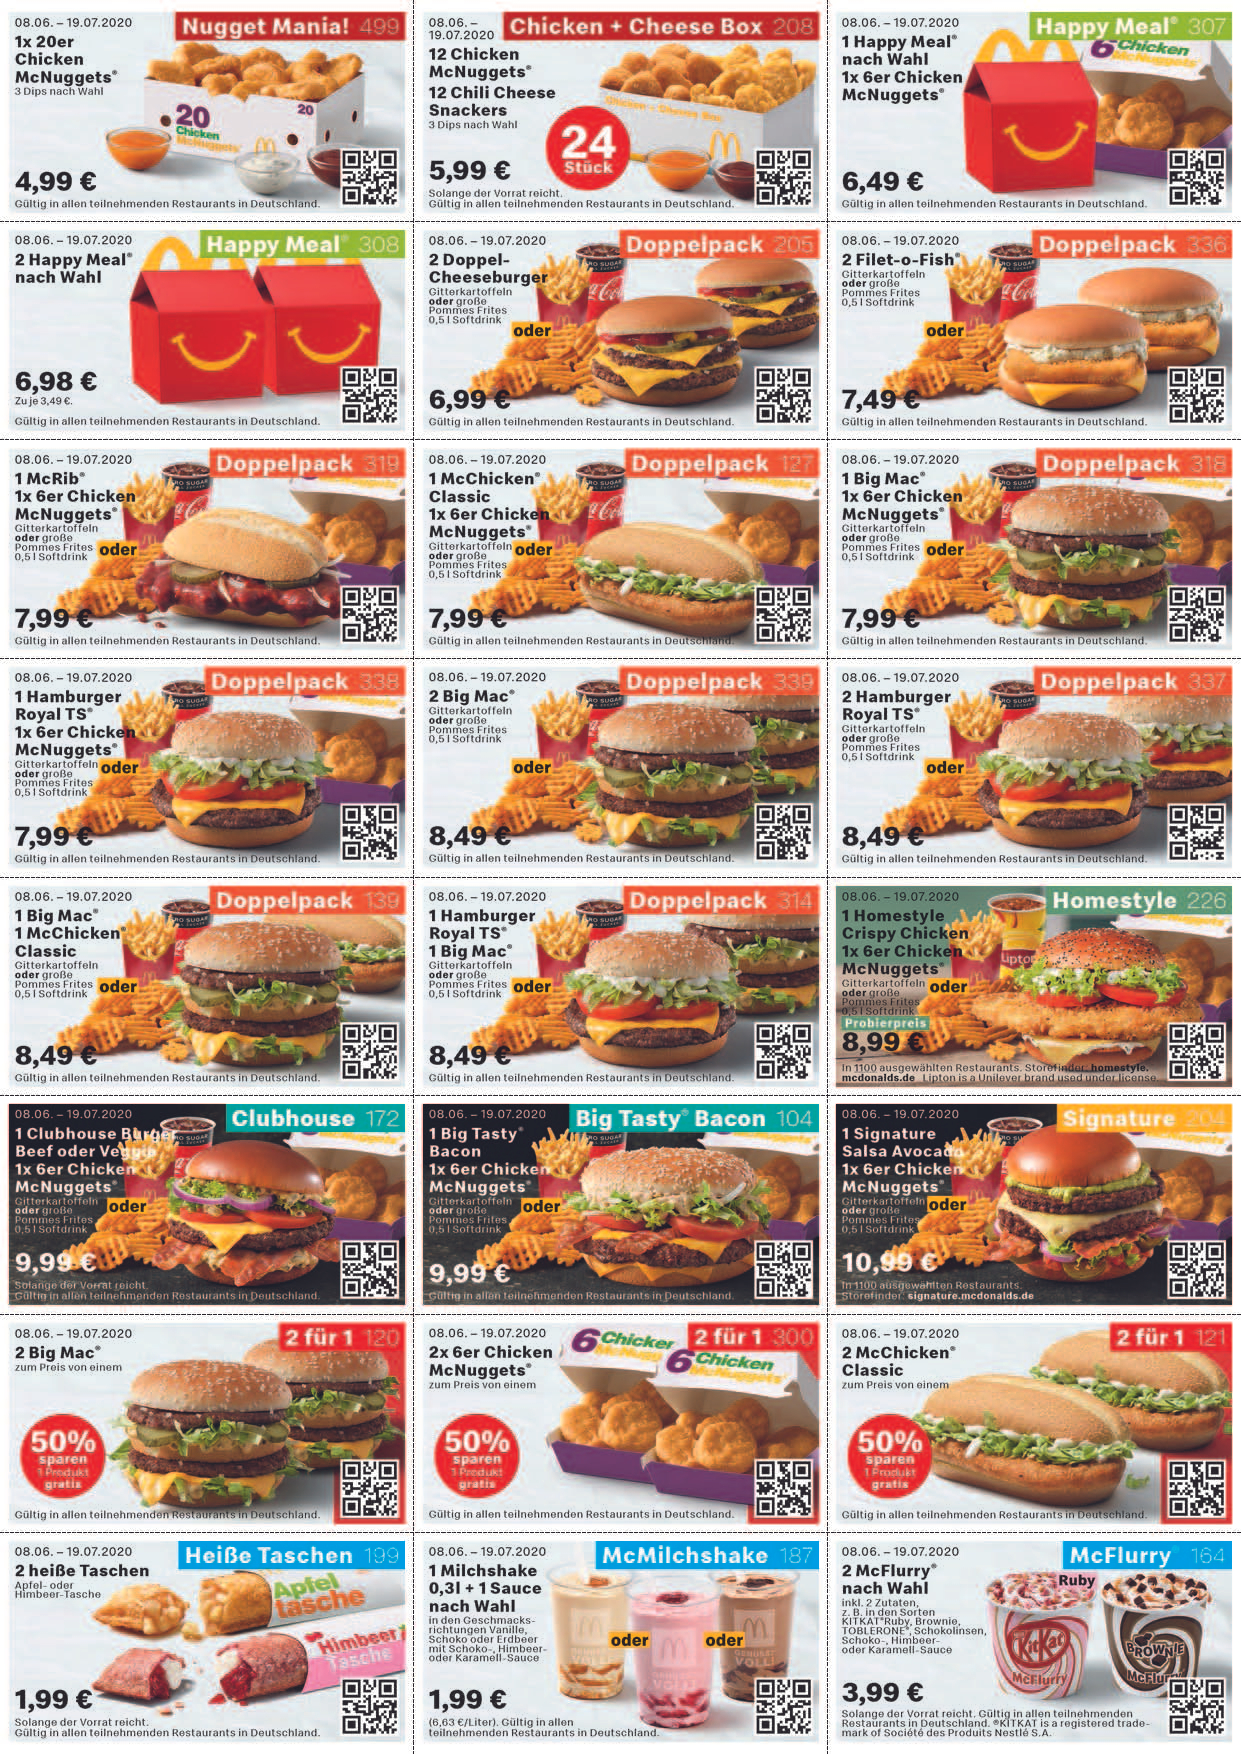 [McDonald's - Coupons vom 02.06. - 19.07.] z.B. 20er Chicken McNuggets